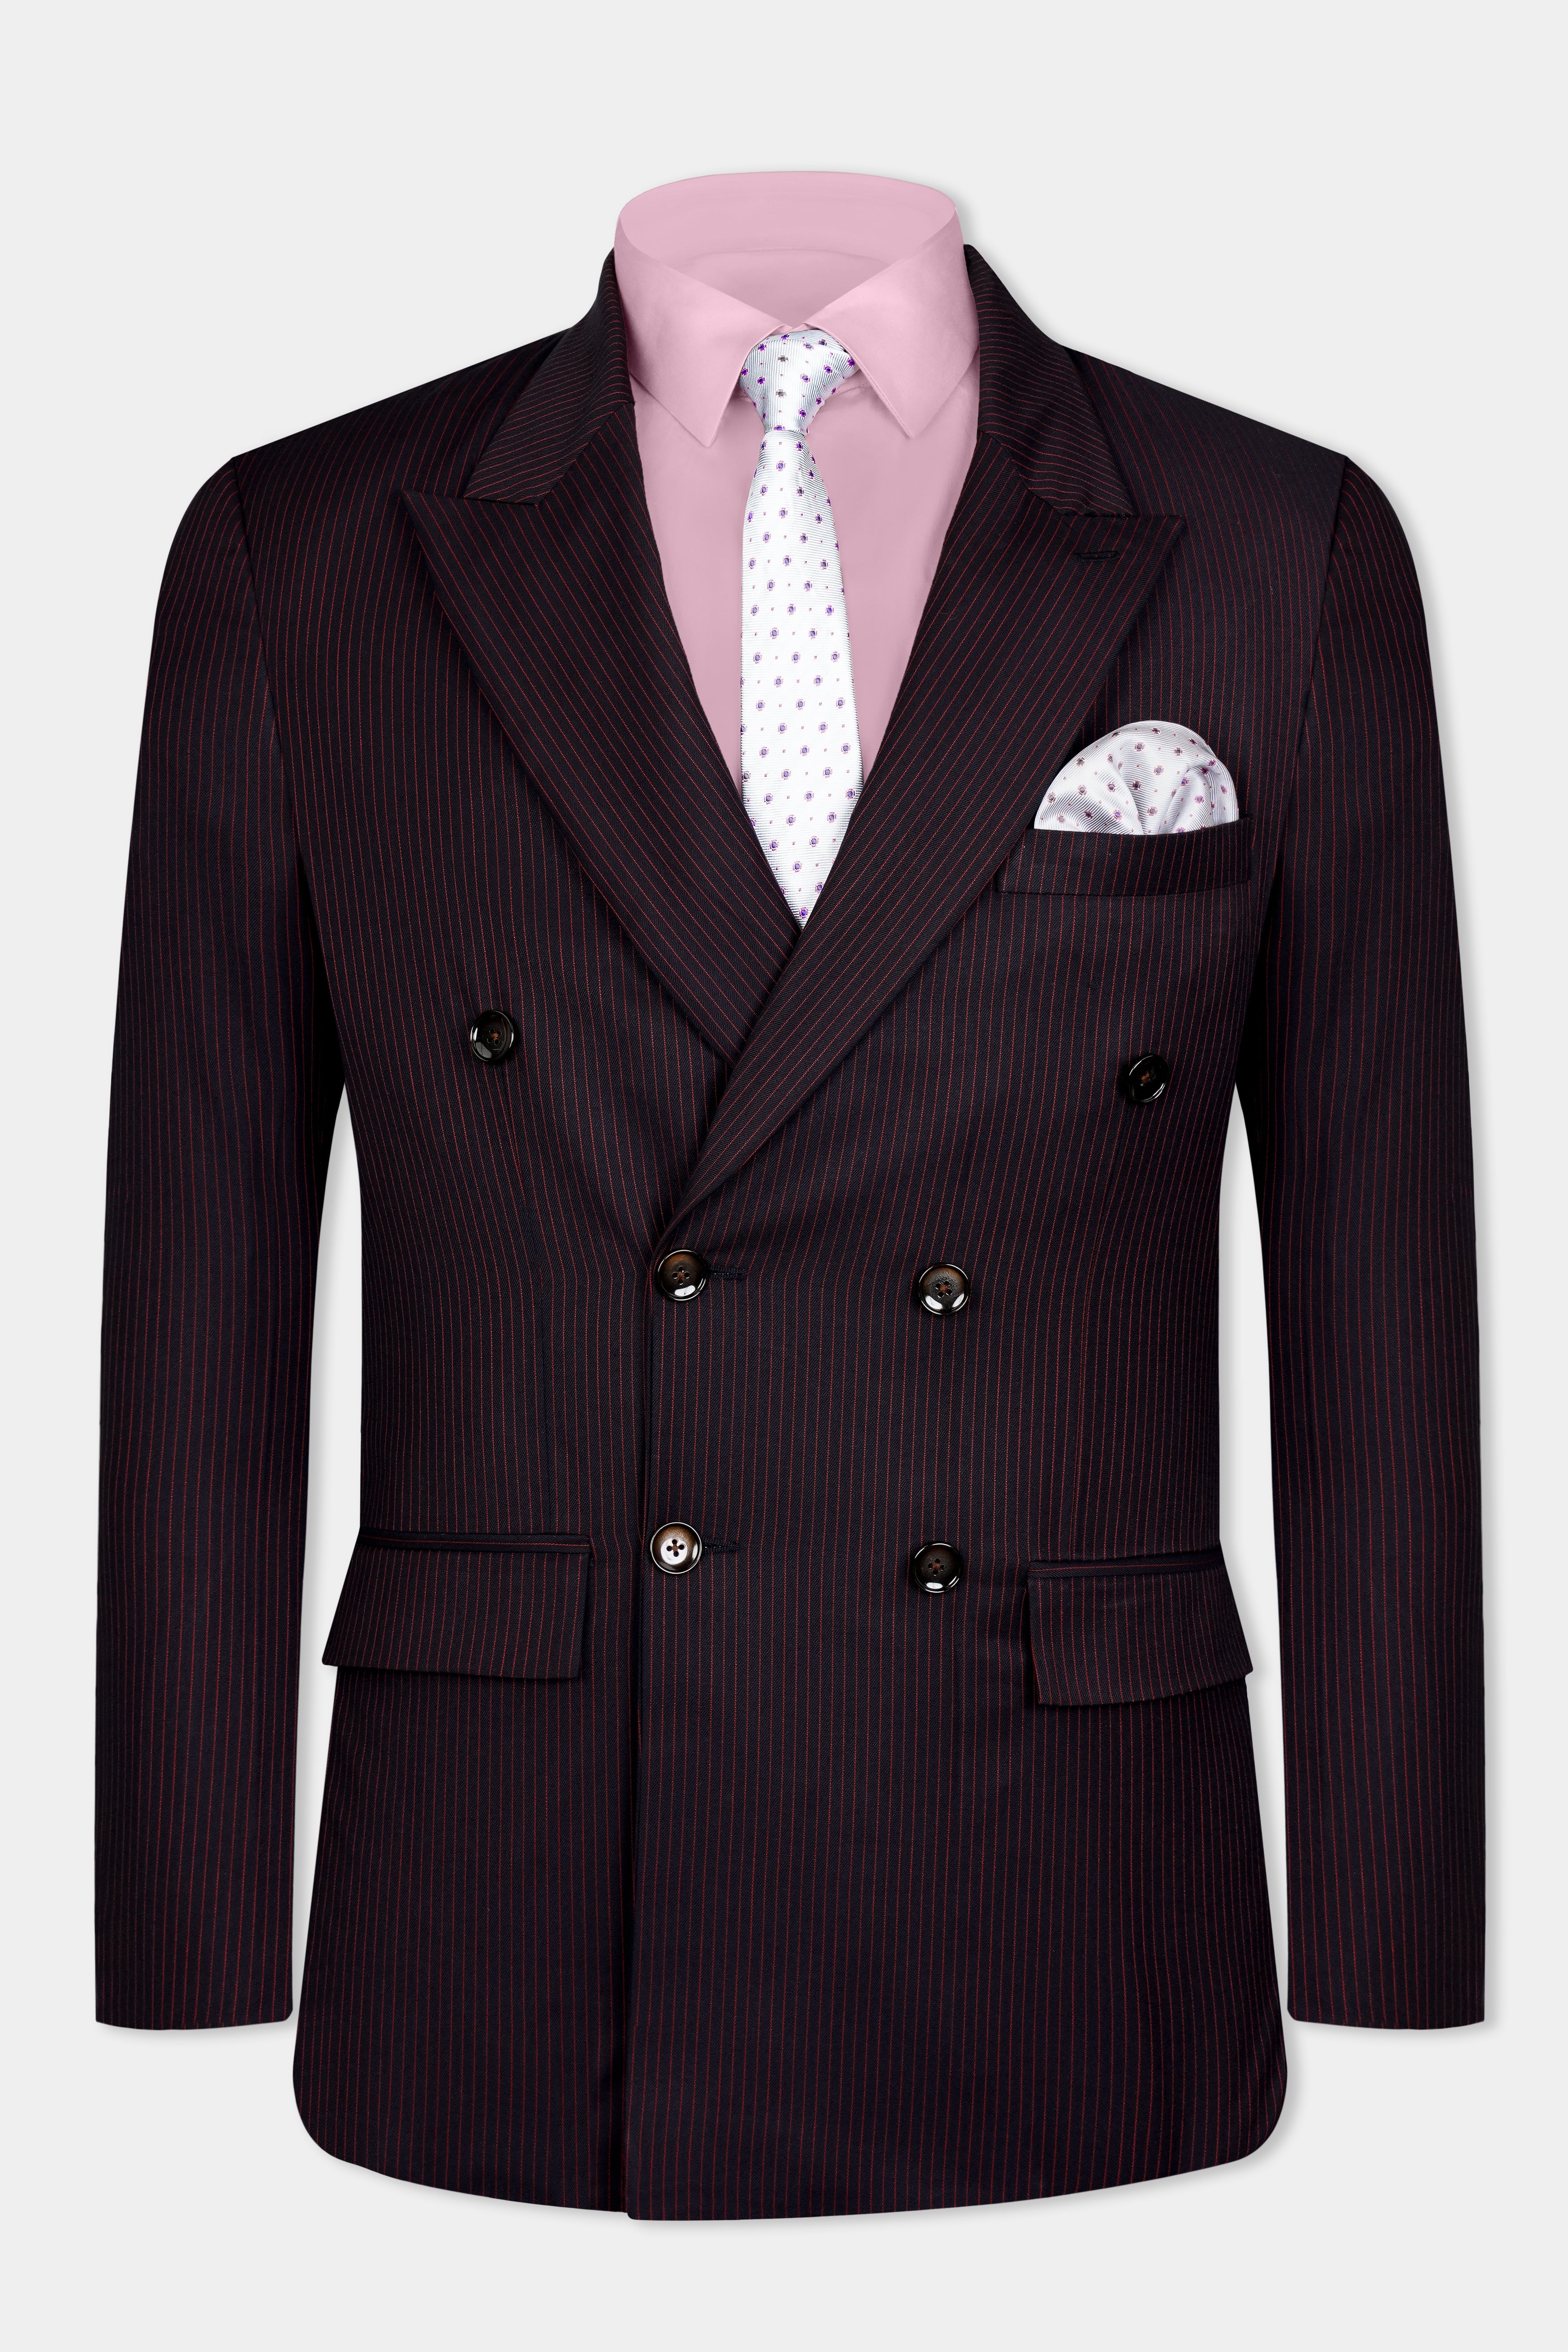 Onyx Maroon and Mandy Pink Striped Double Breasted Wool Rich Suit ST3087-DB-36, ST3087-DB-38, ST3087-DB-40, ST3087-DB-42, ST3087-DB-44, ST3087-DB-46, ST3087-DB-48, ST3087-DB-50, ST3087-DB-52, ST3087-DB-54, ST3087-DB-56, ST3087-DB-58, ST3087-DB-60